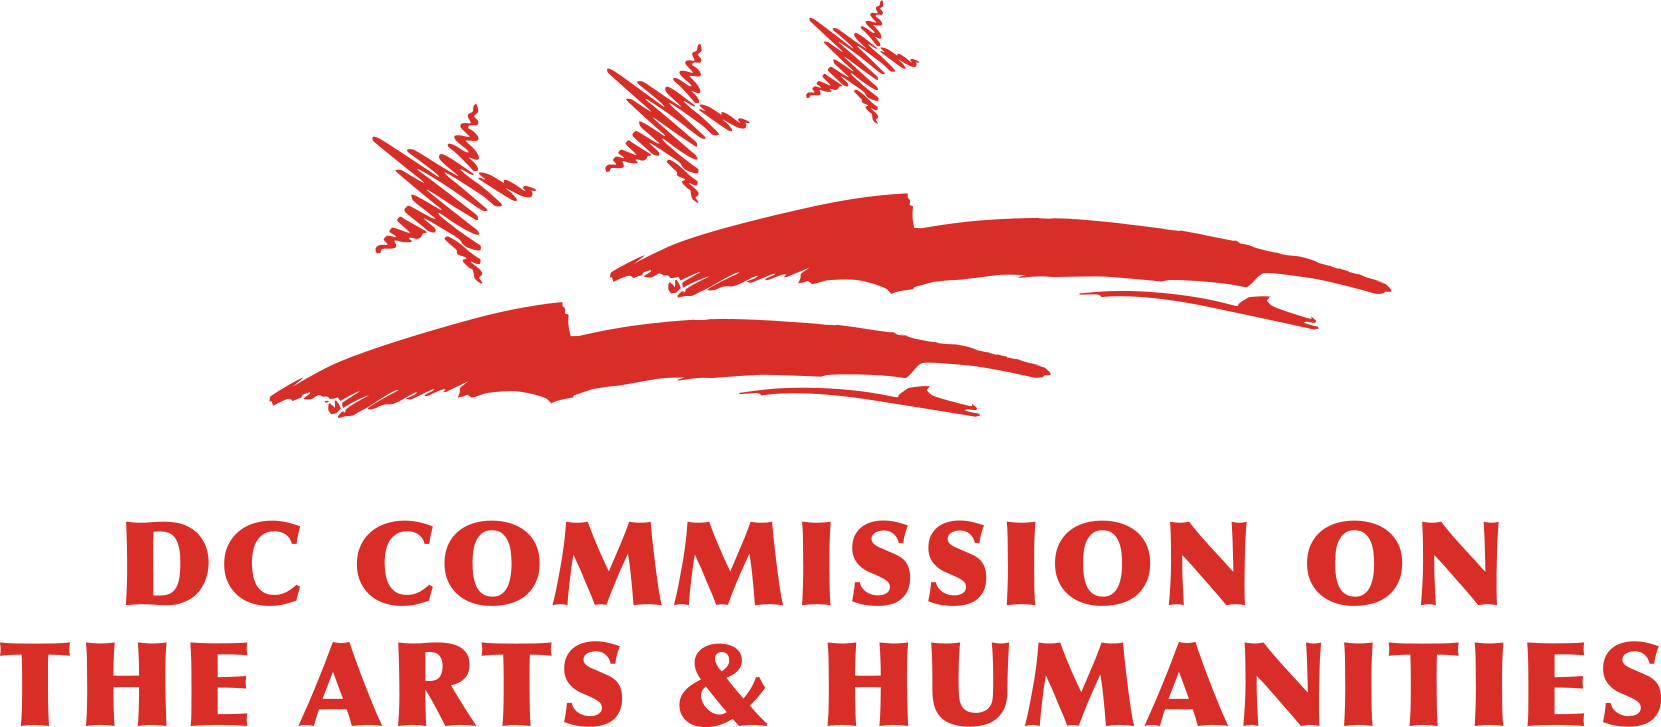 DC Commision on the Arts & Humanities